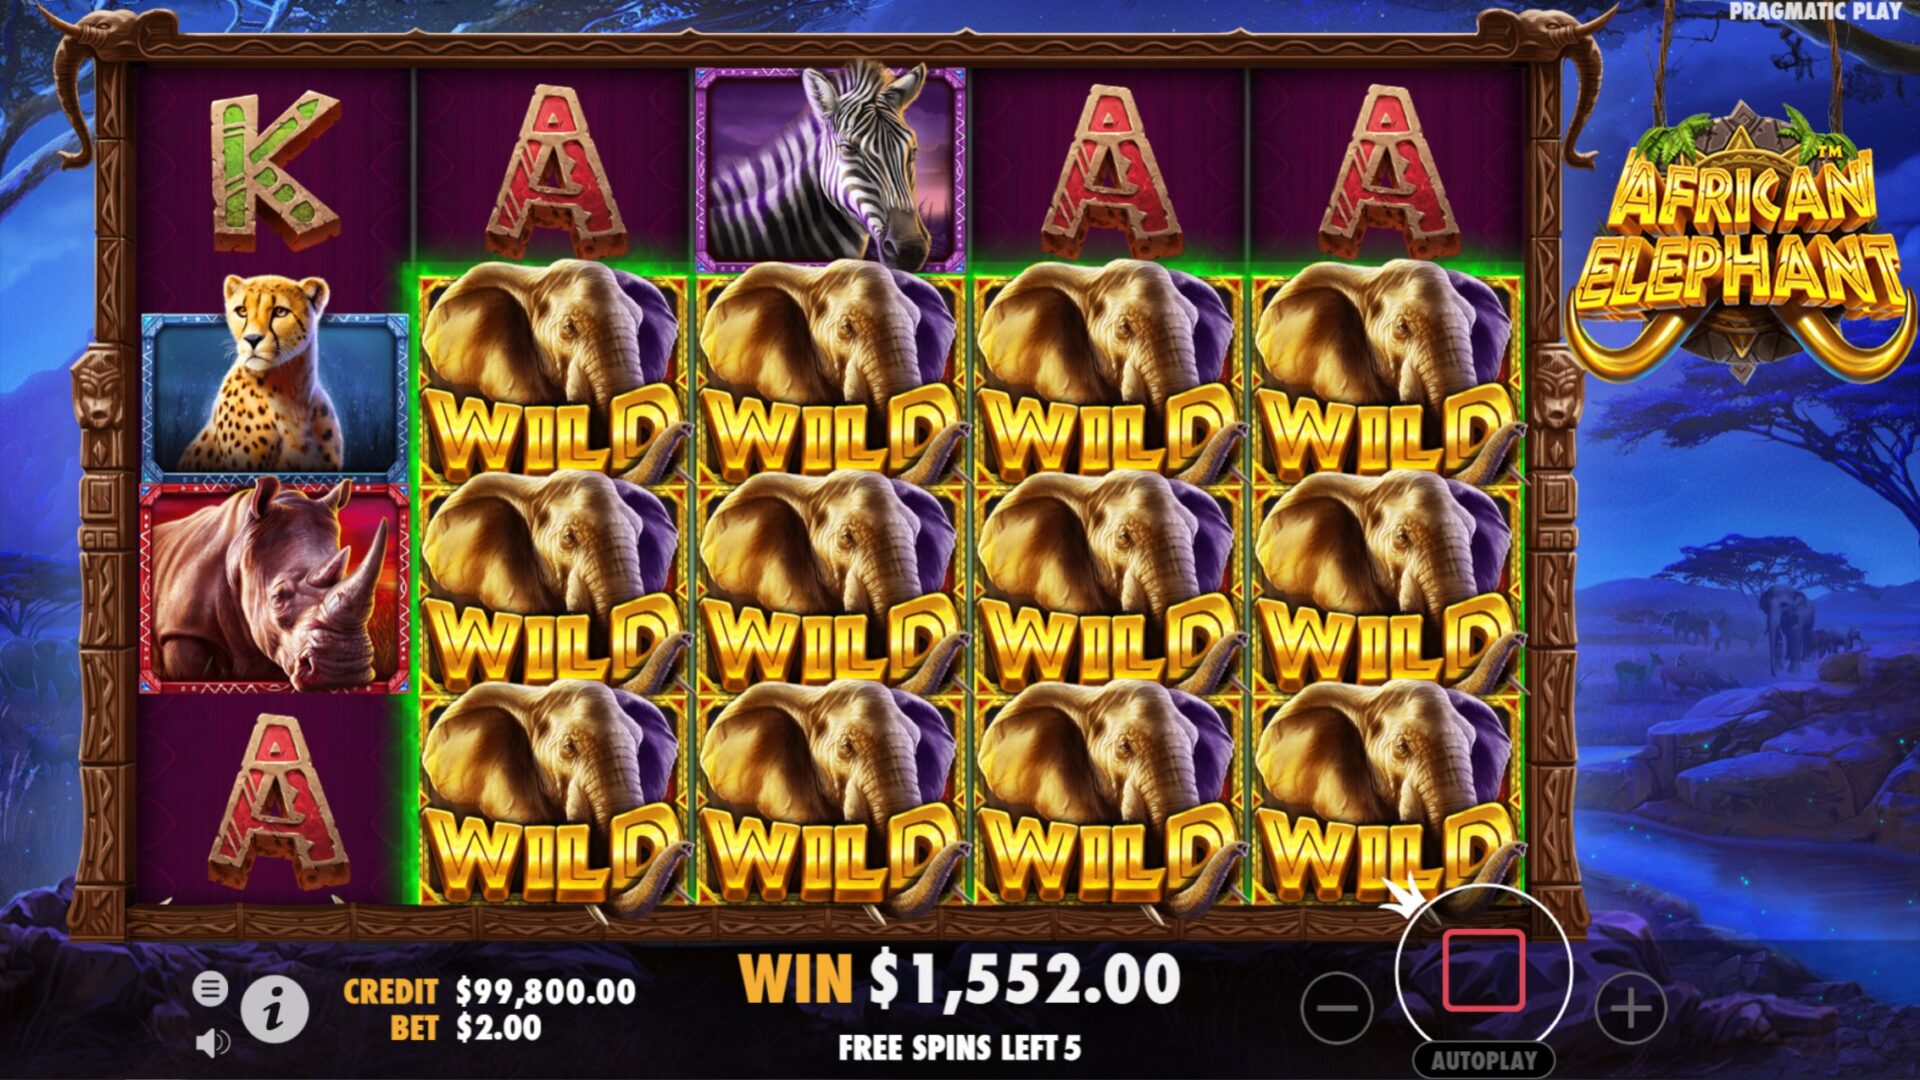 African Elephant Slot - Free Spins